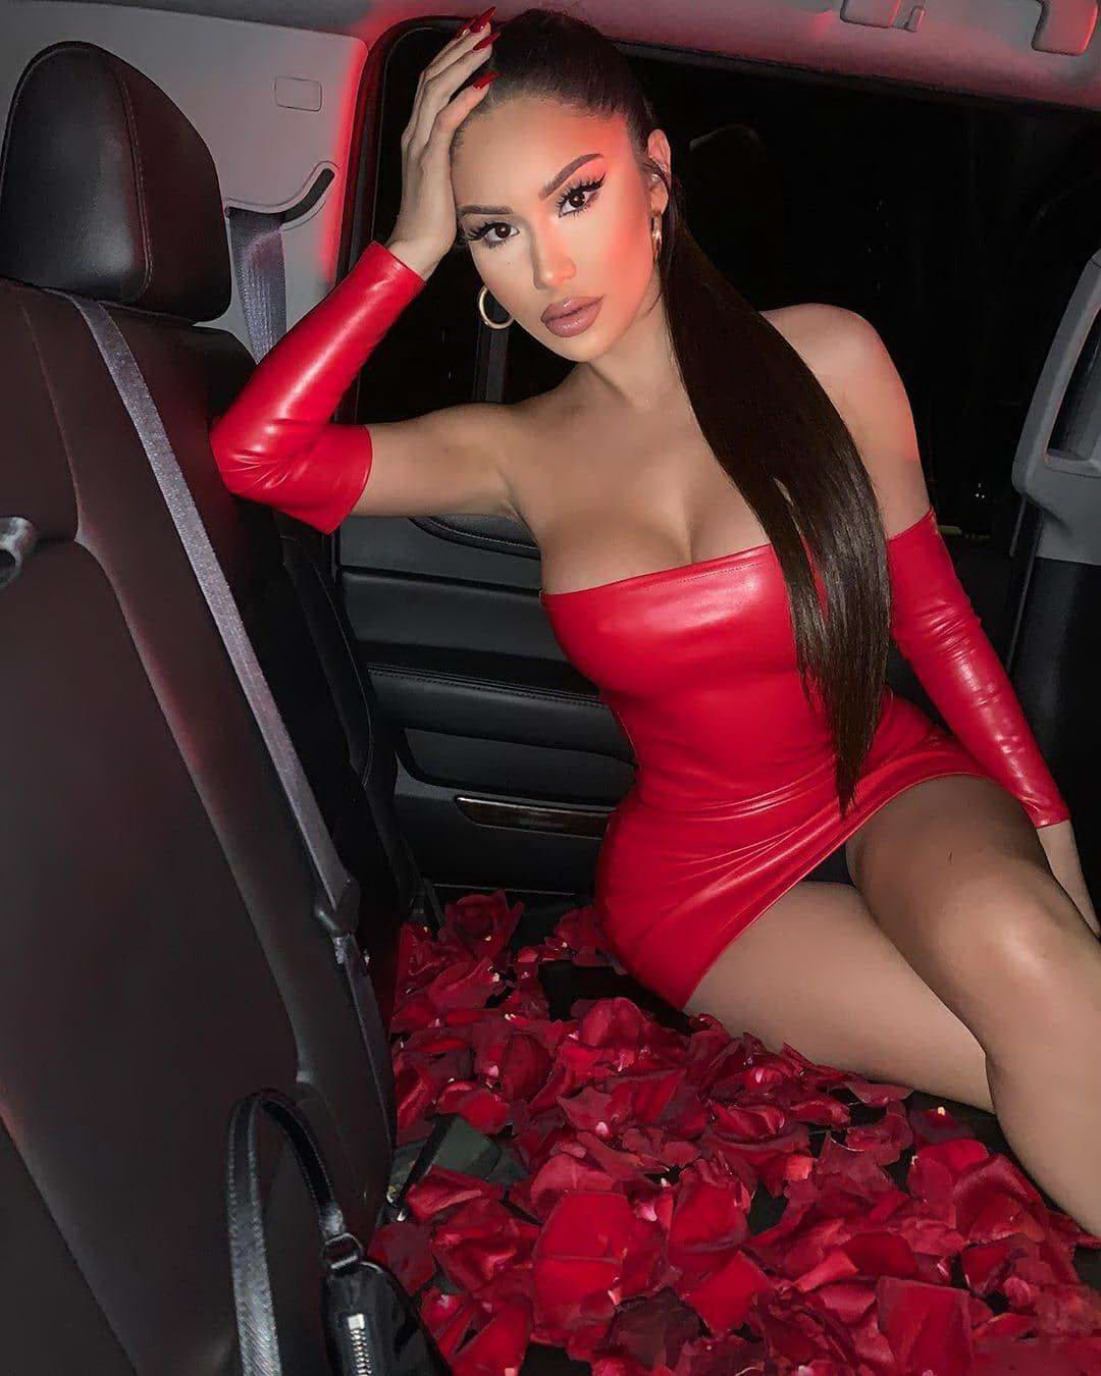 Red party dress